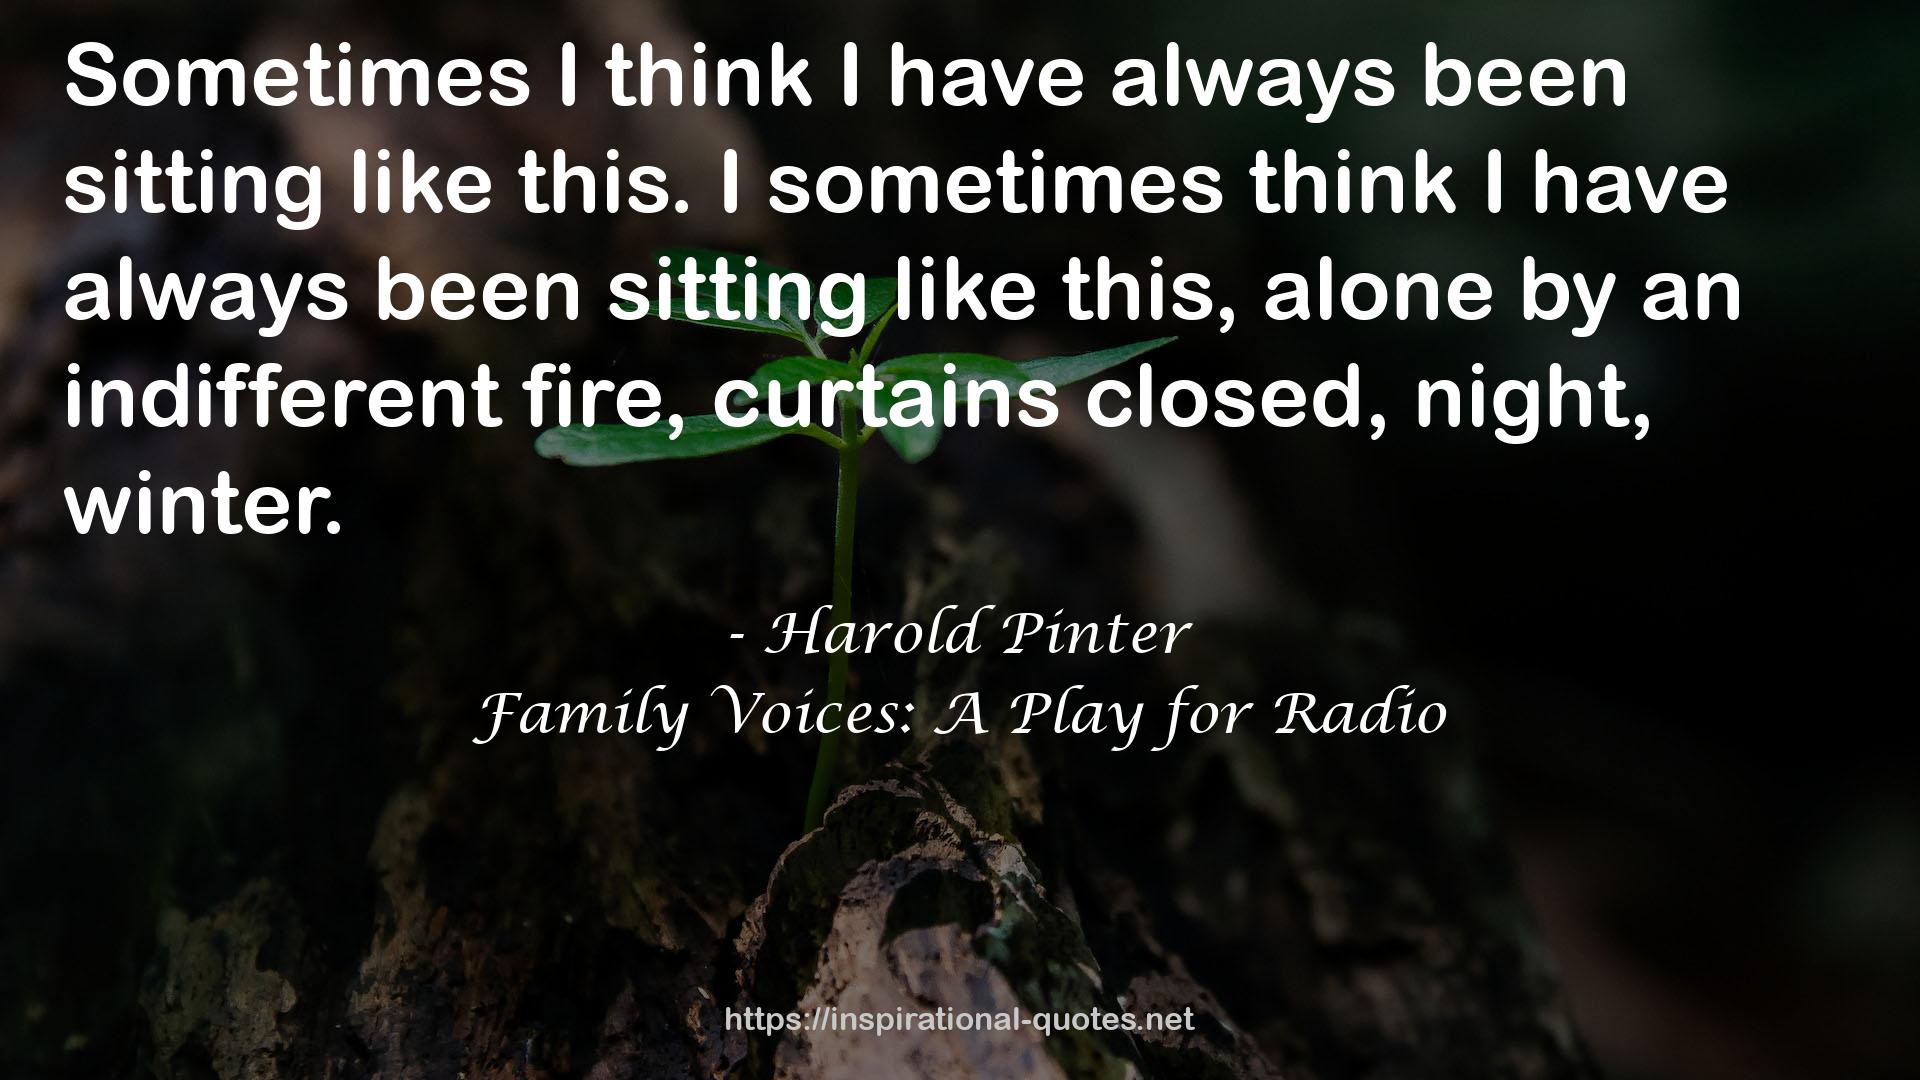 Family Voices: A Play for Radio QUOTES